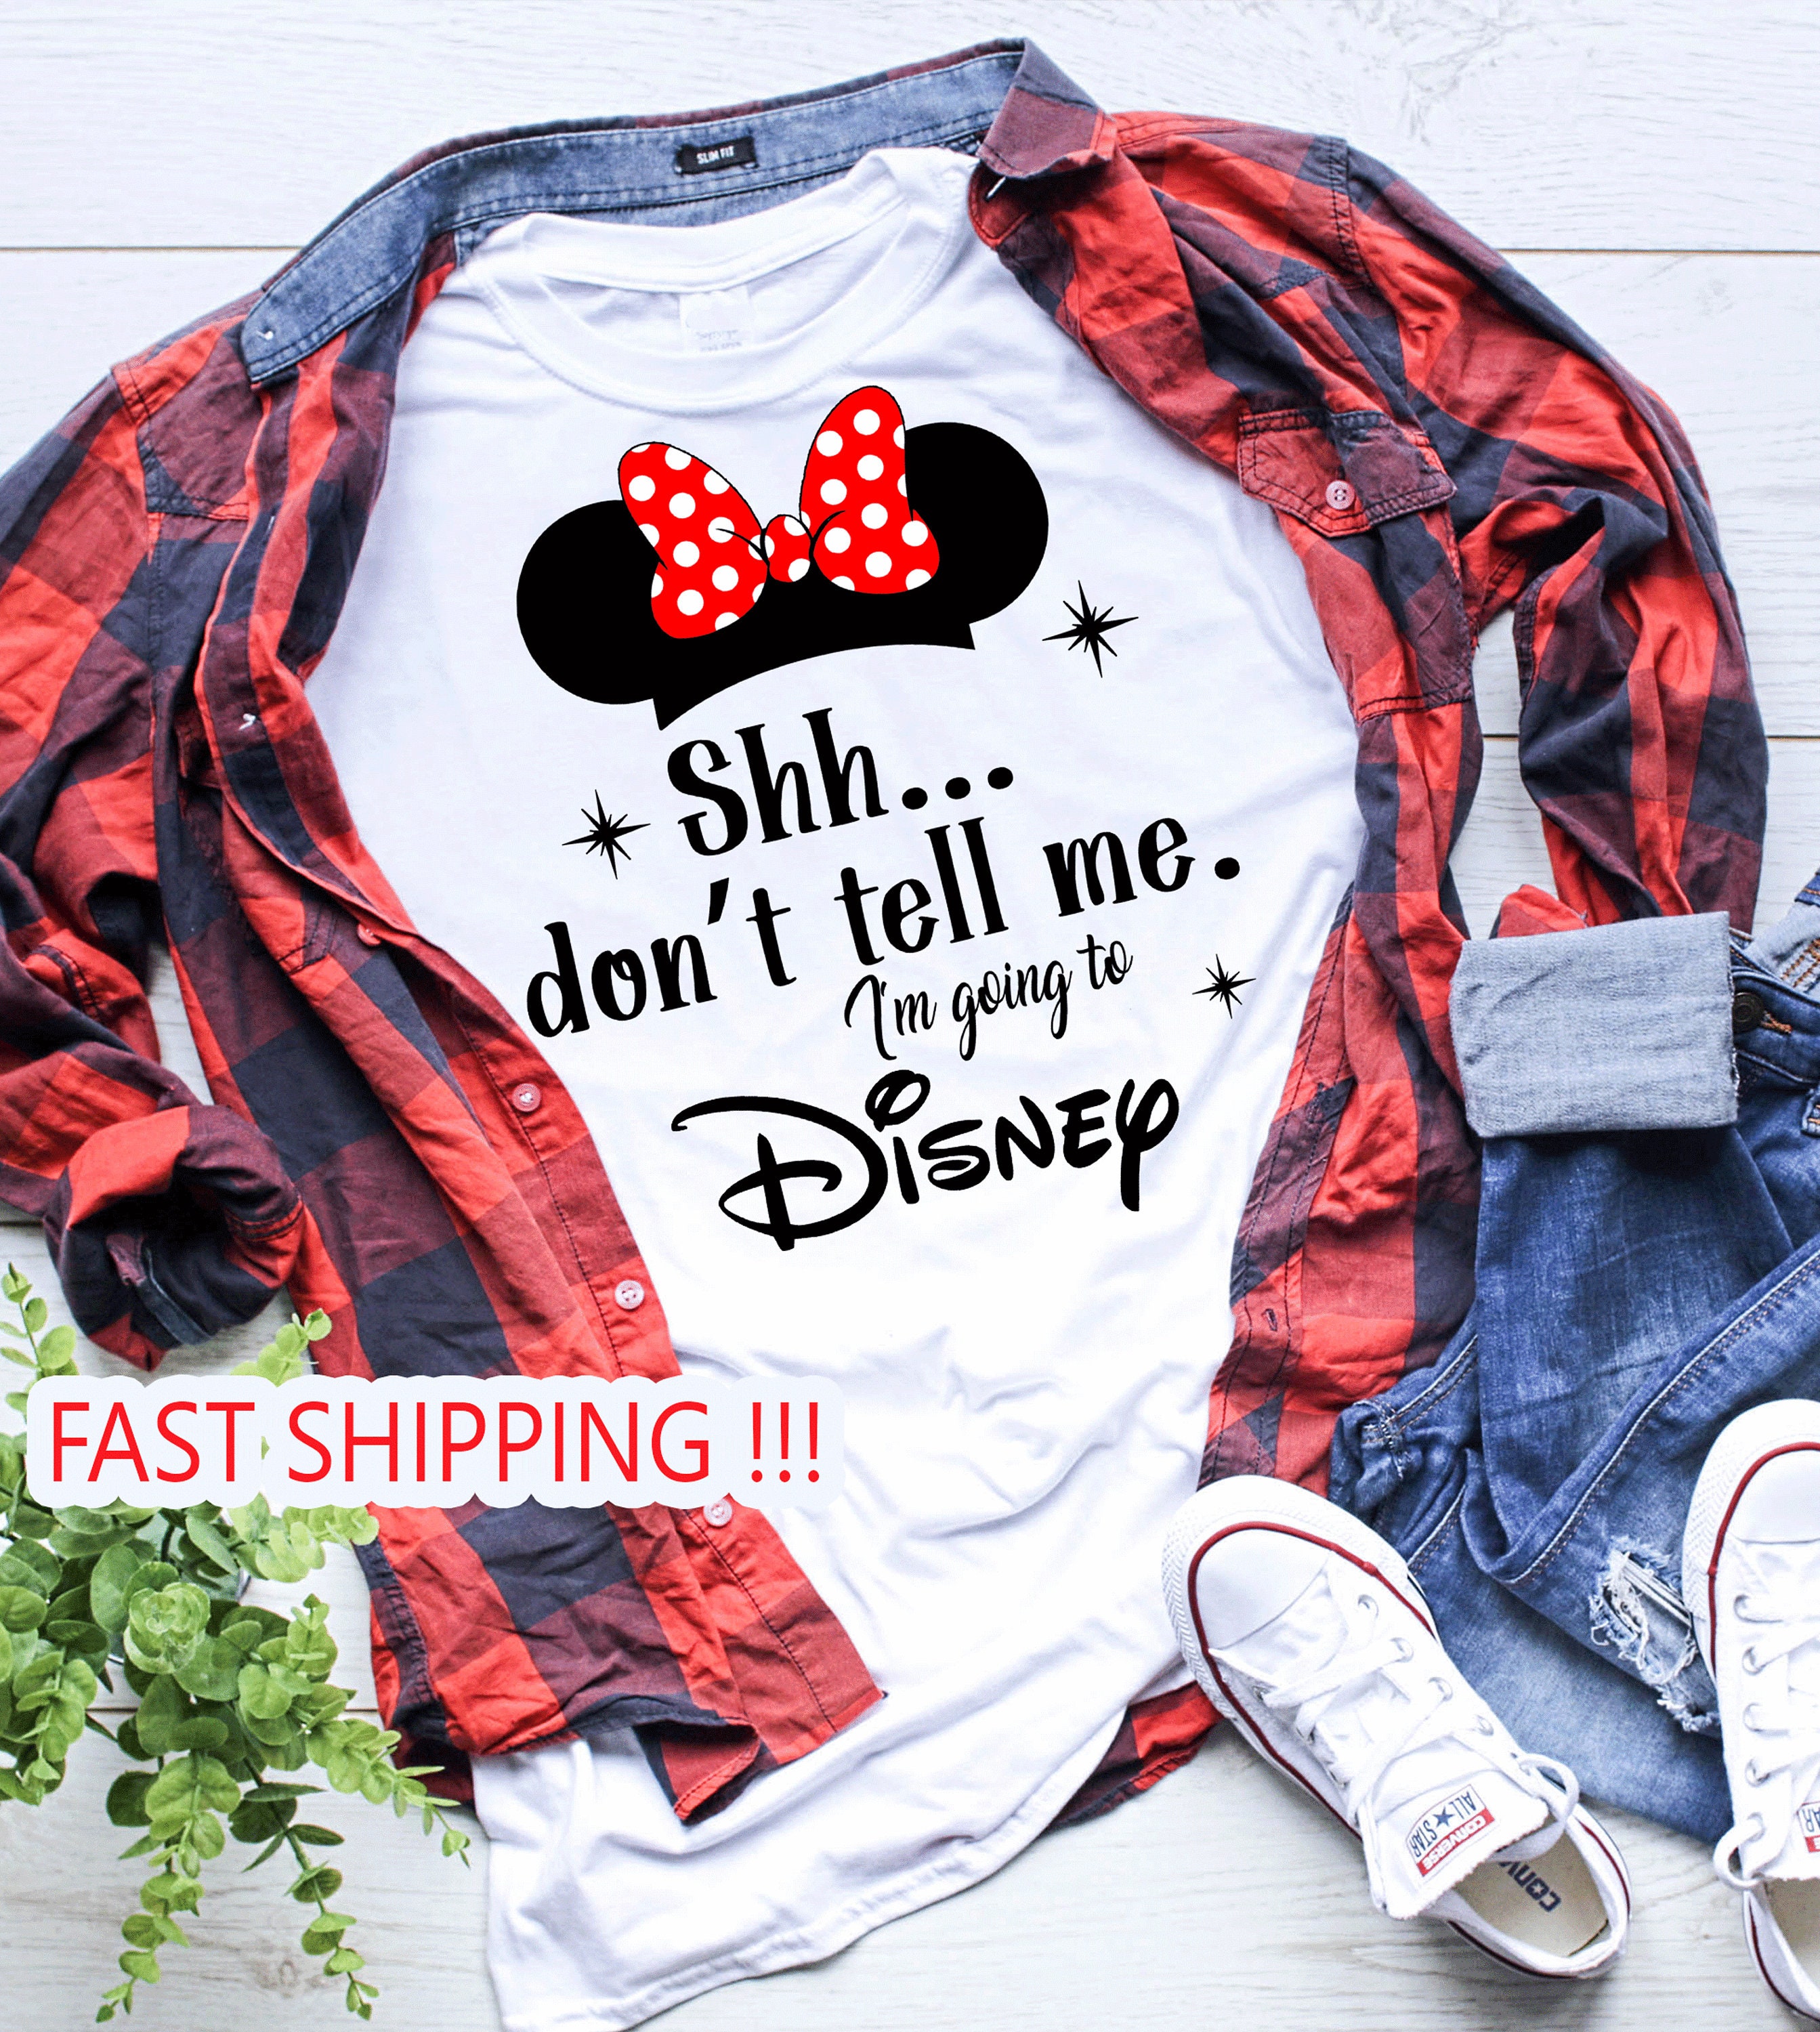 Some People Go To Disney Too Much, It's Me Adult Tee Shirt